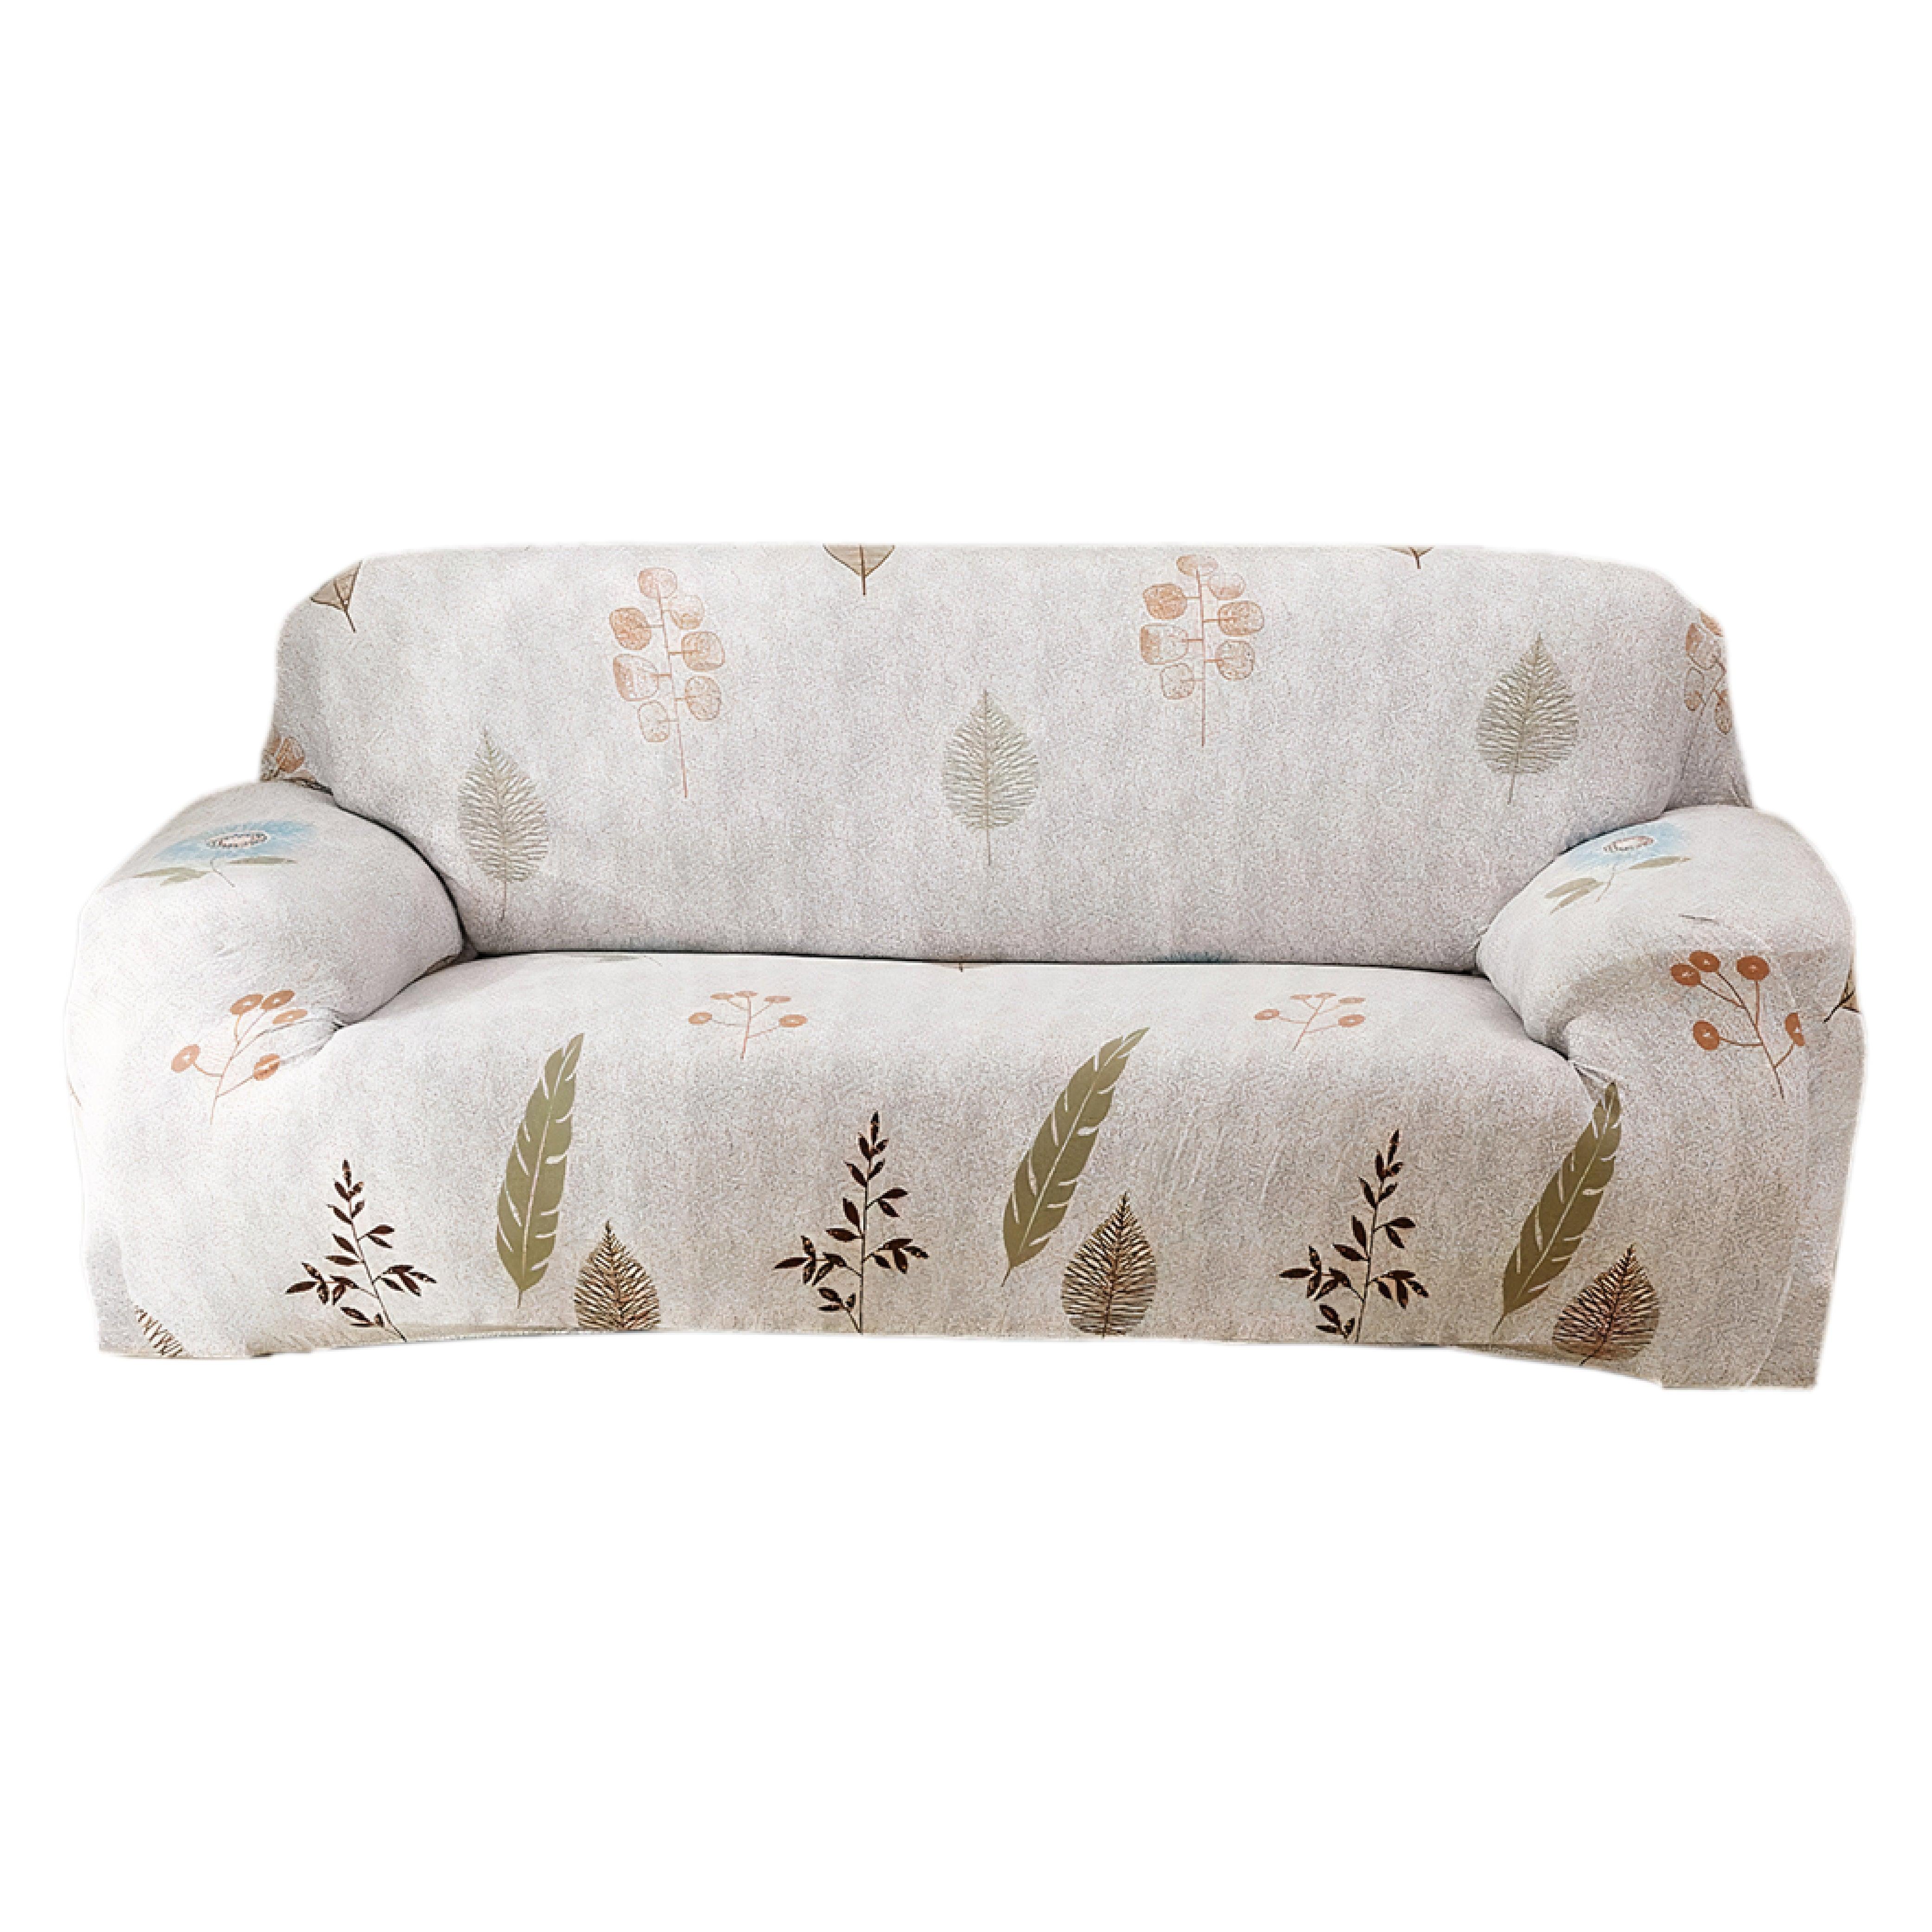 Hyper Cover Stretch Sofa Cover with Patterns Twilight Leaves | Sofa Covers | Brilliant Home Living